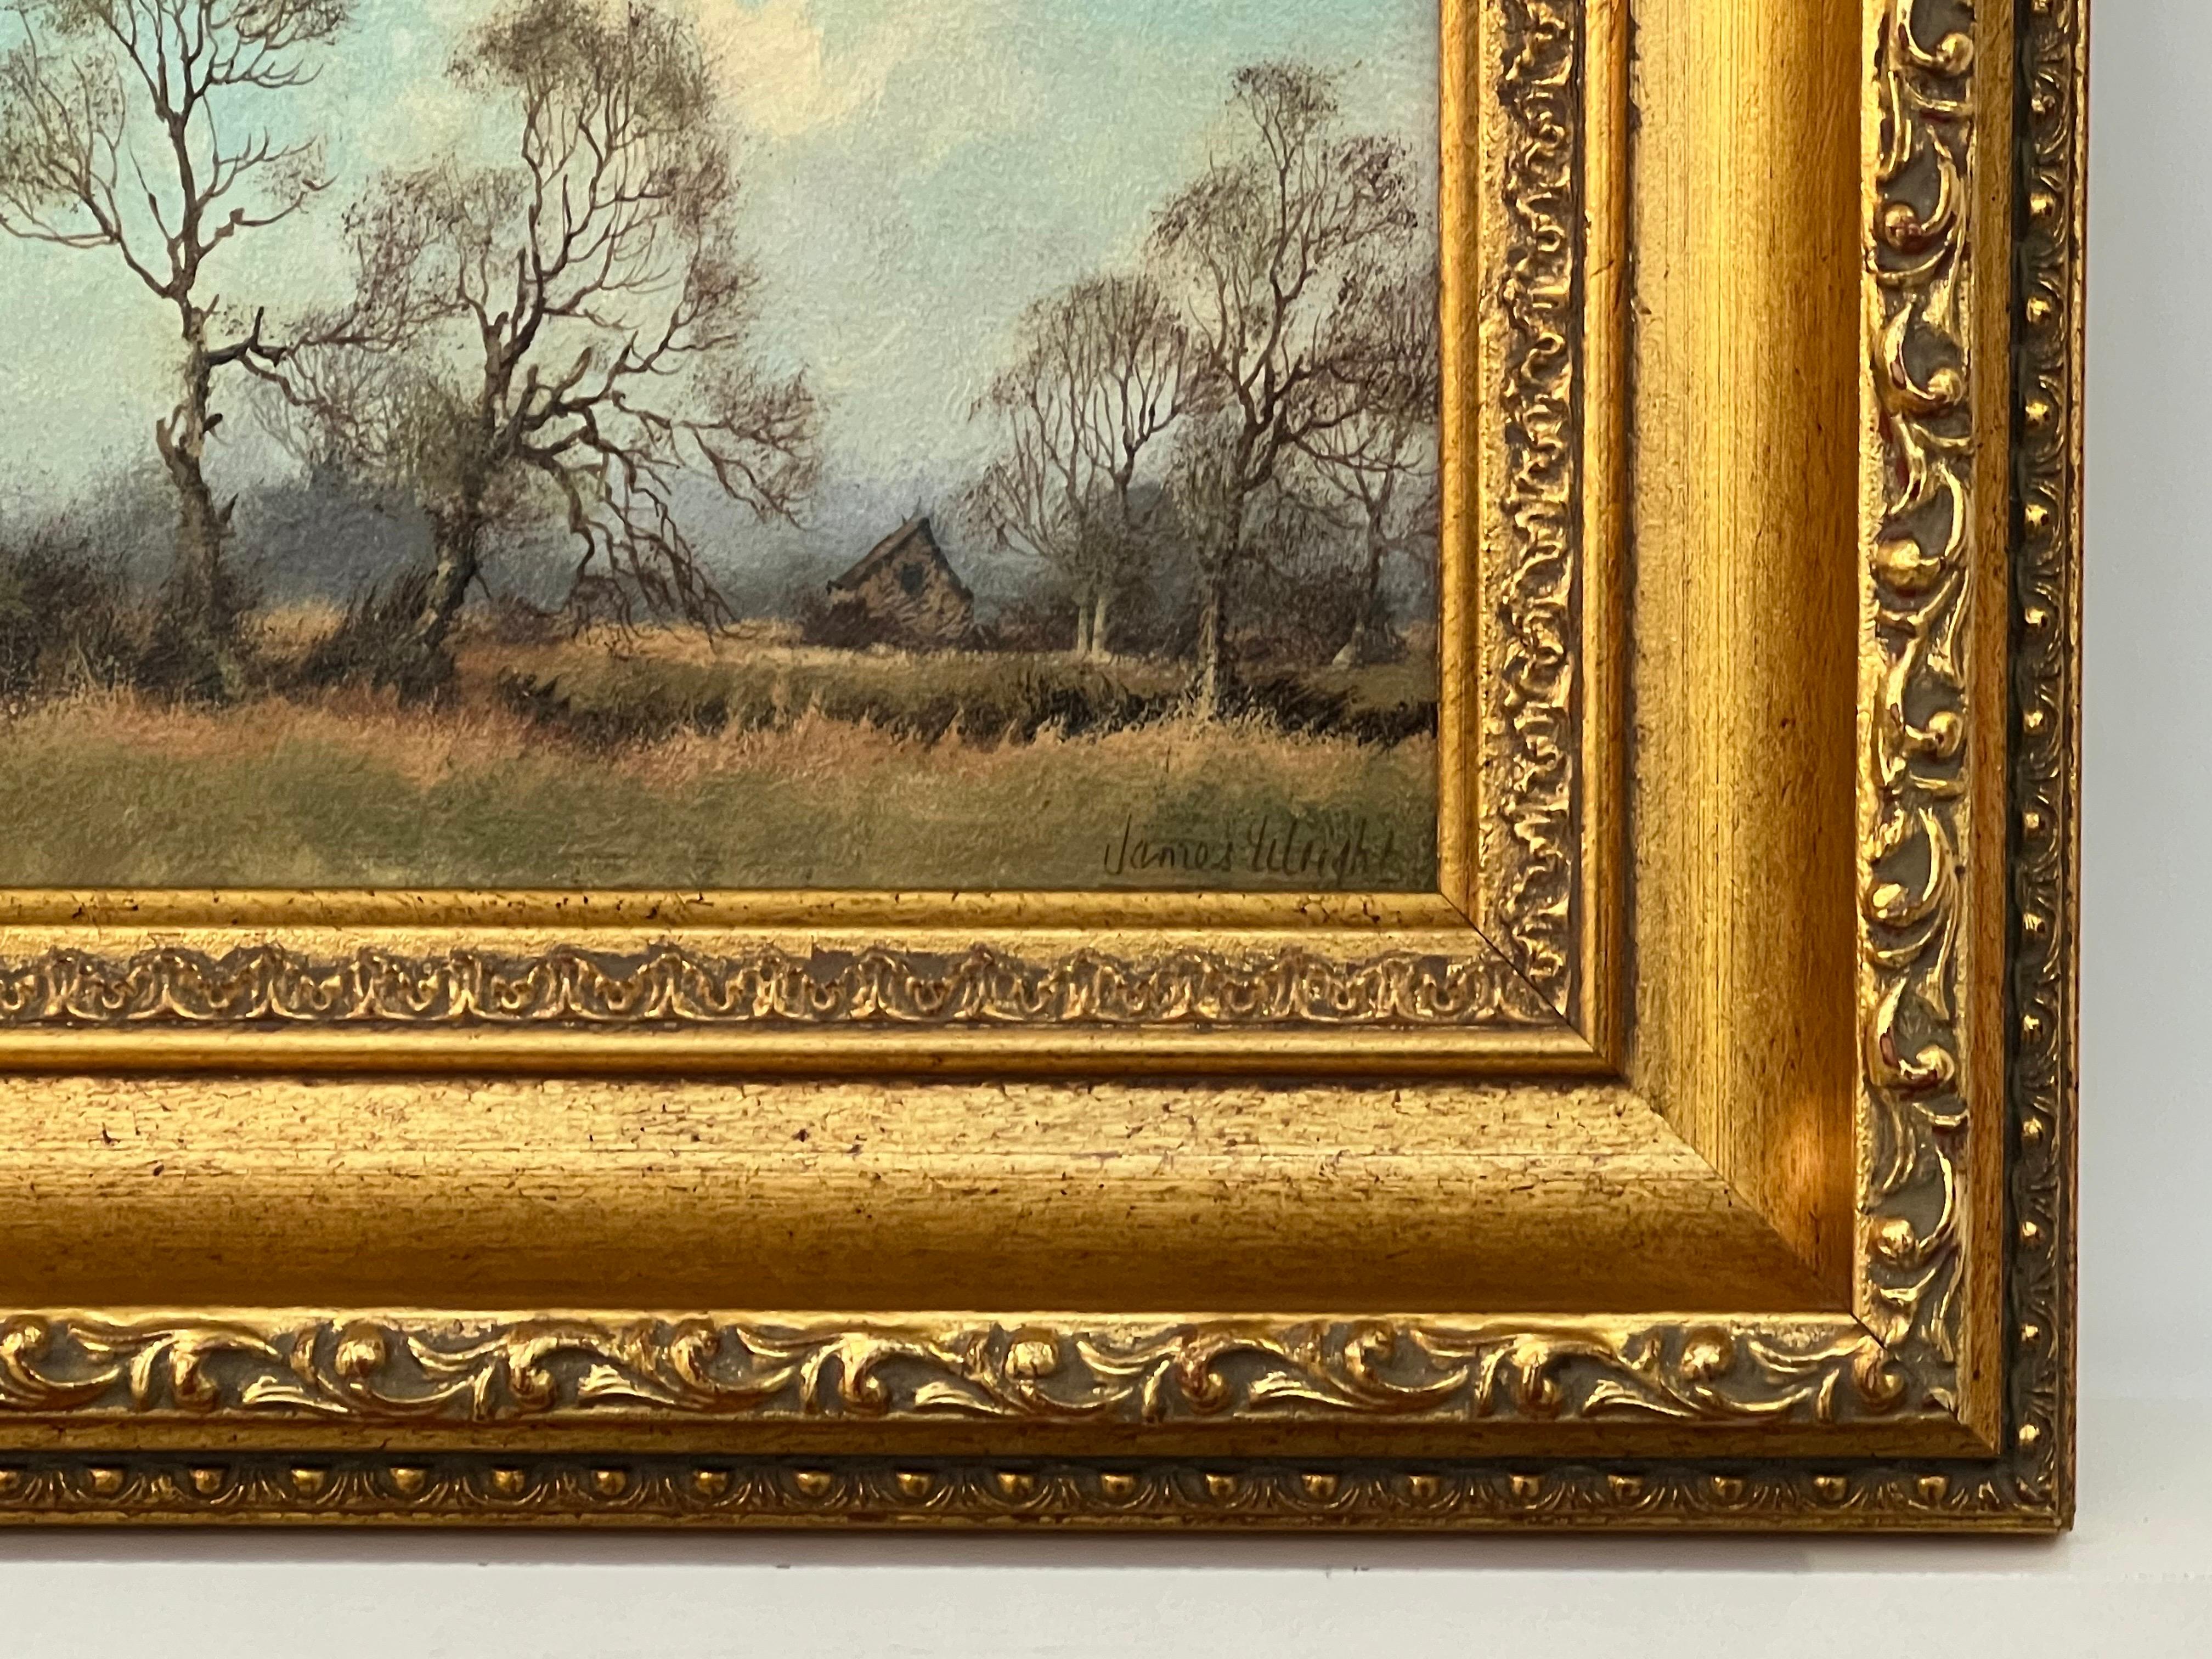 Trees & Cottage in the English Countryside by 20th Century Landscape Artist - Romantic Painting by James Wright